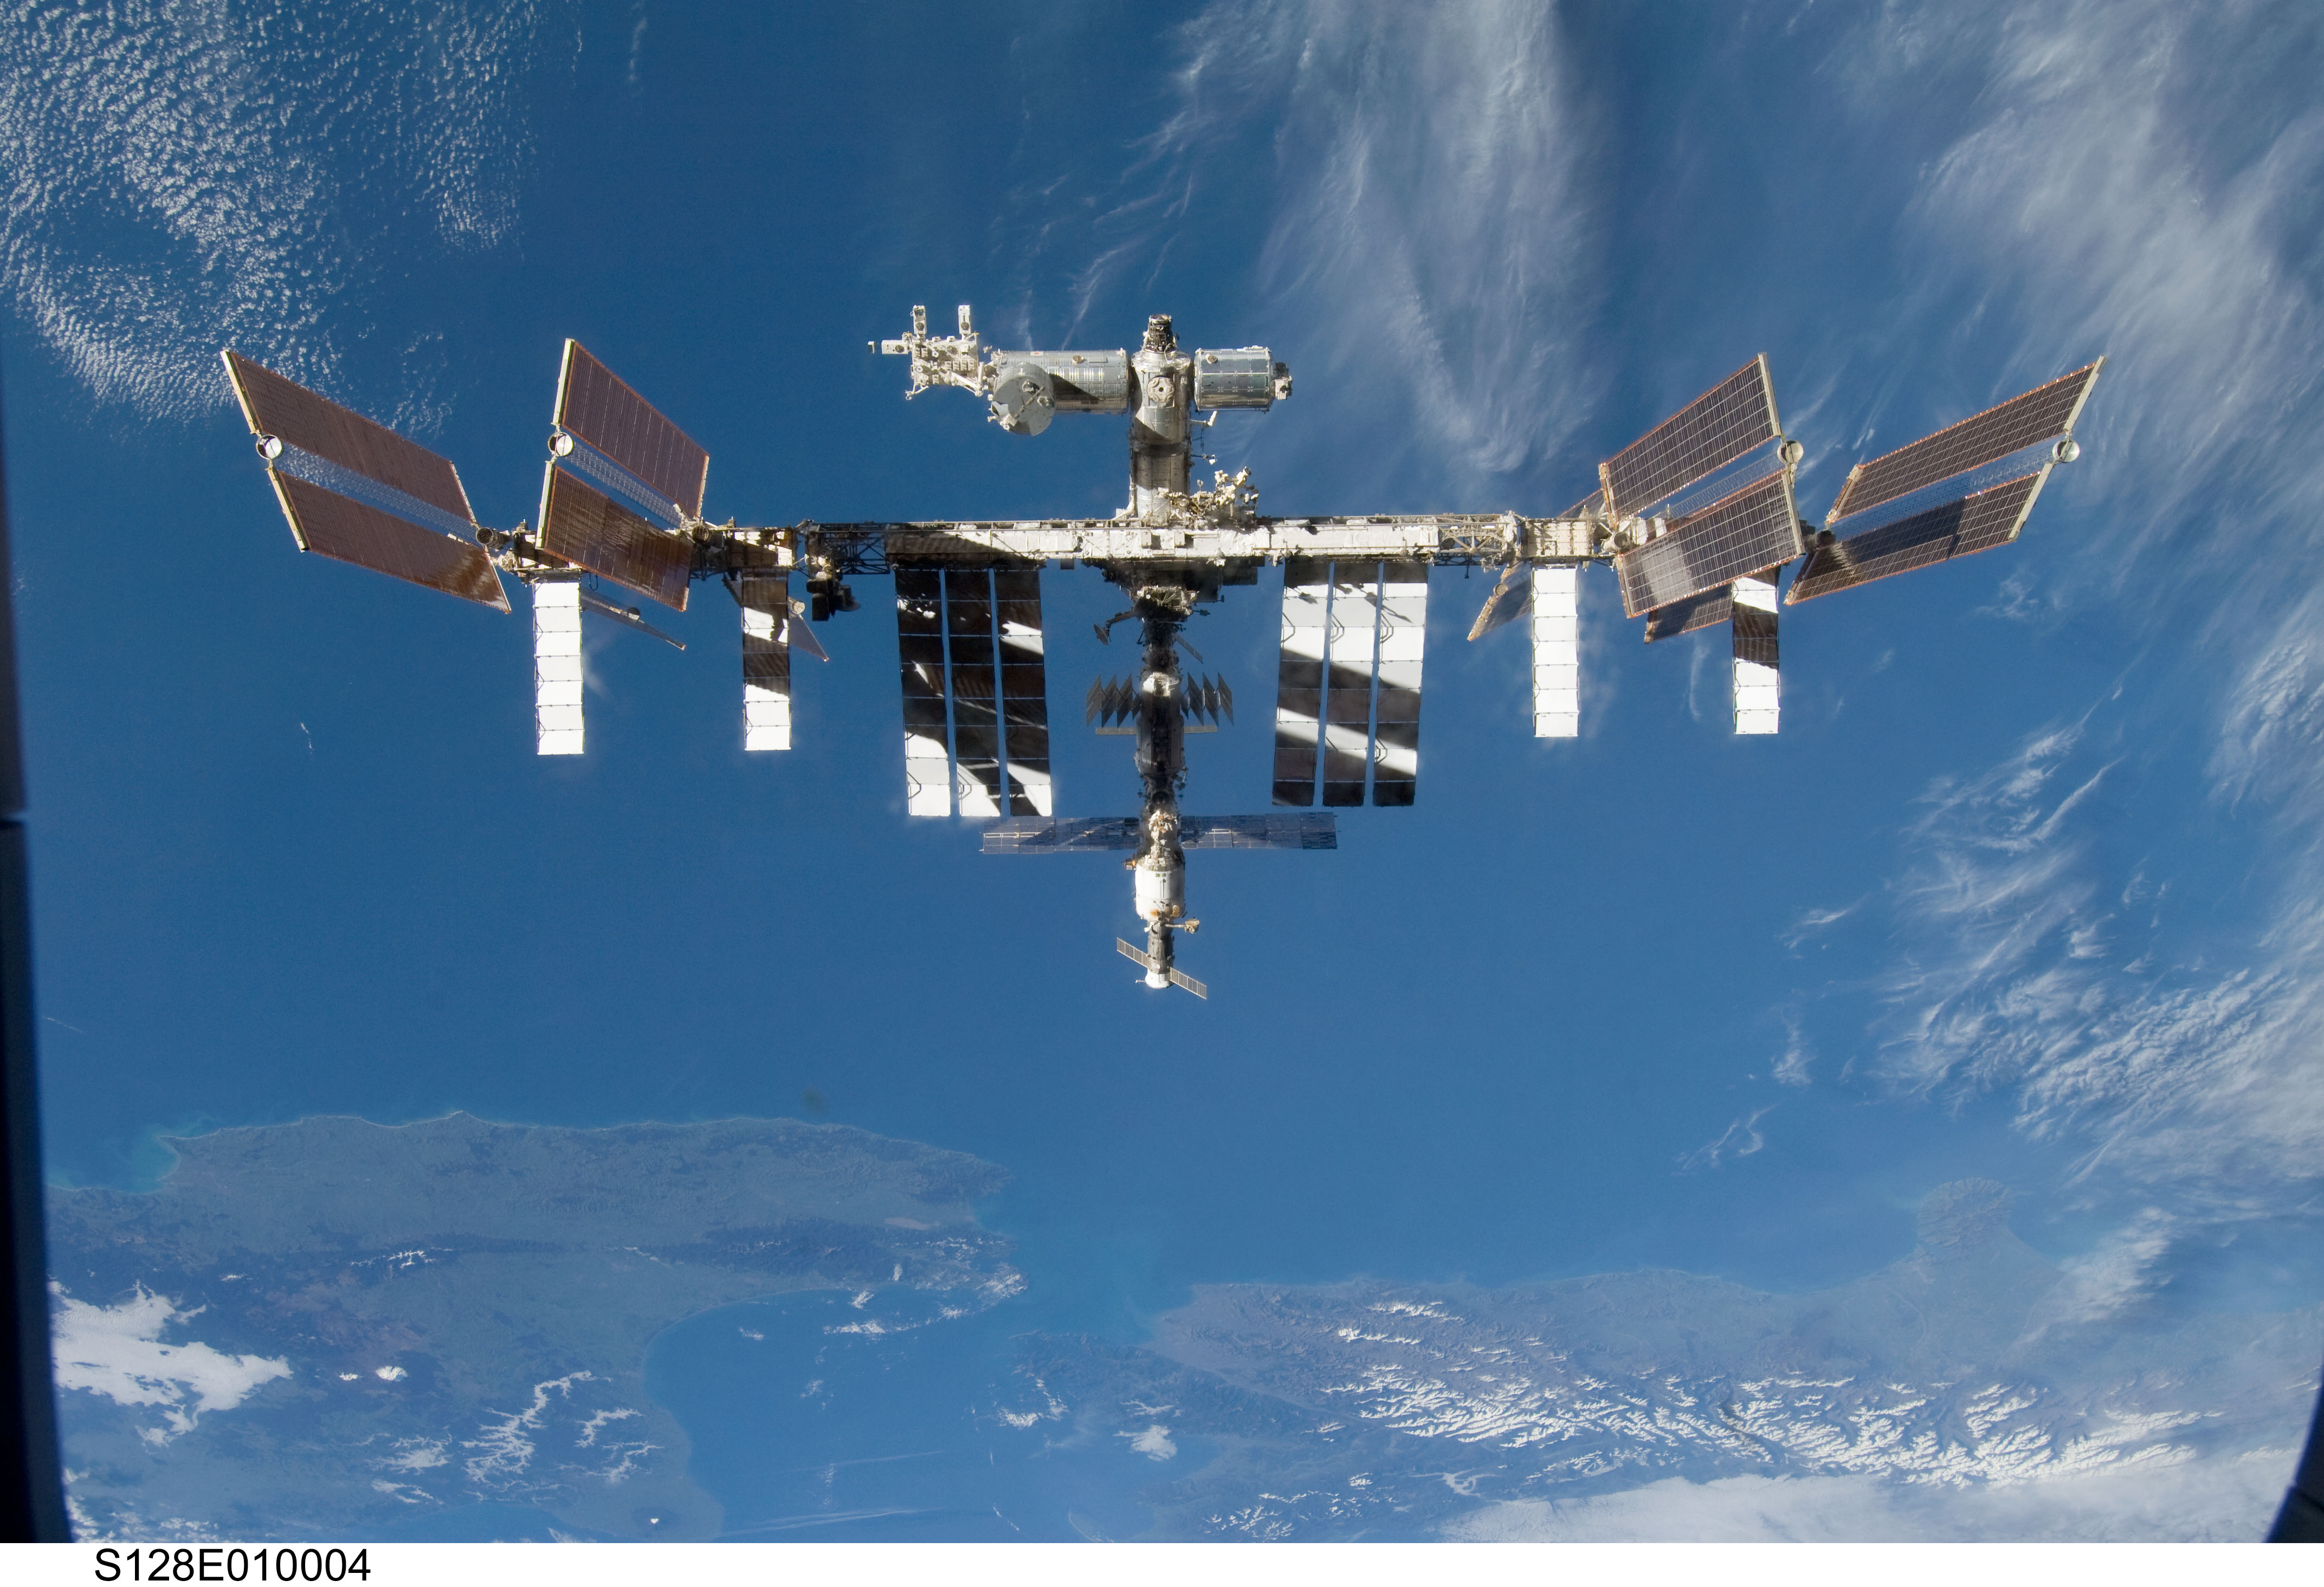 ISS image from APOD